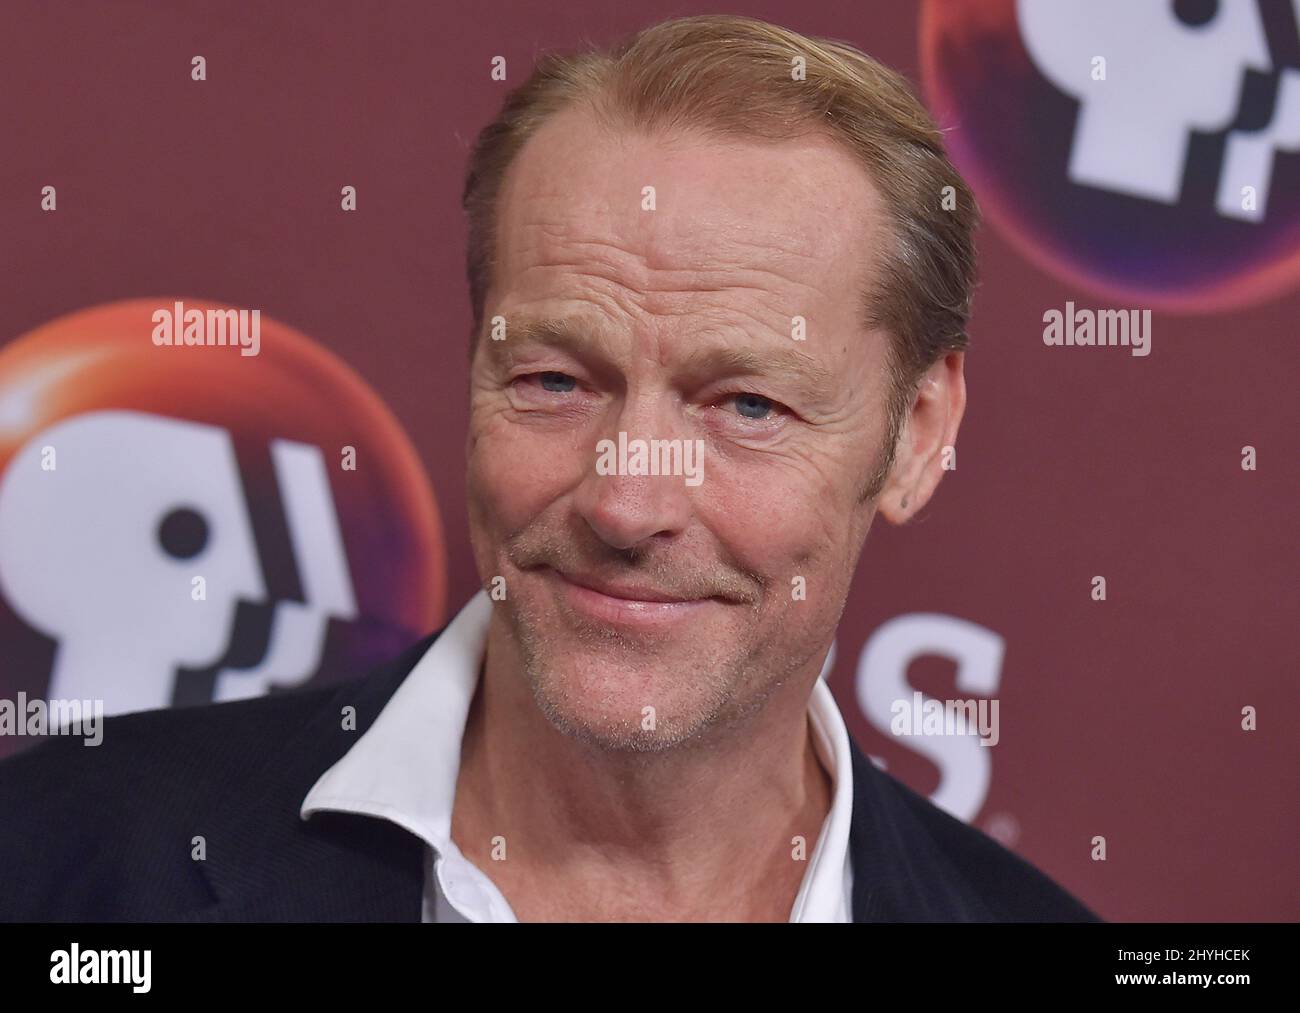 Iain Glen at PBS Masterpiece's Photo Call for shows including Mrs. Wilson, Les Miserables, Endeavour, Grantchester at the Langham Huntington Hotel on February 01, 2019 in Pasadena, CA. Stock Photo